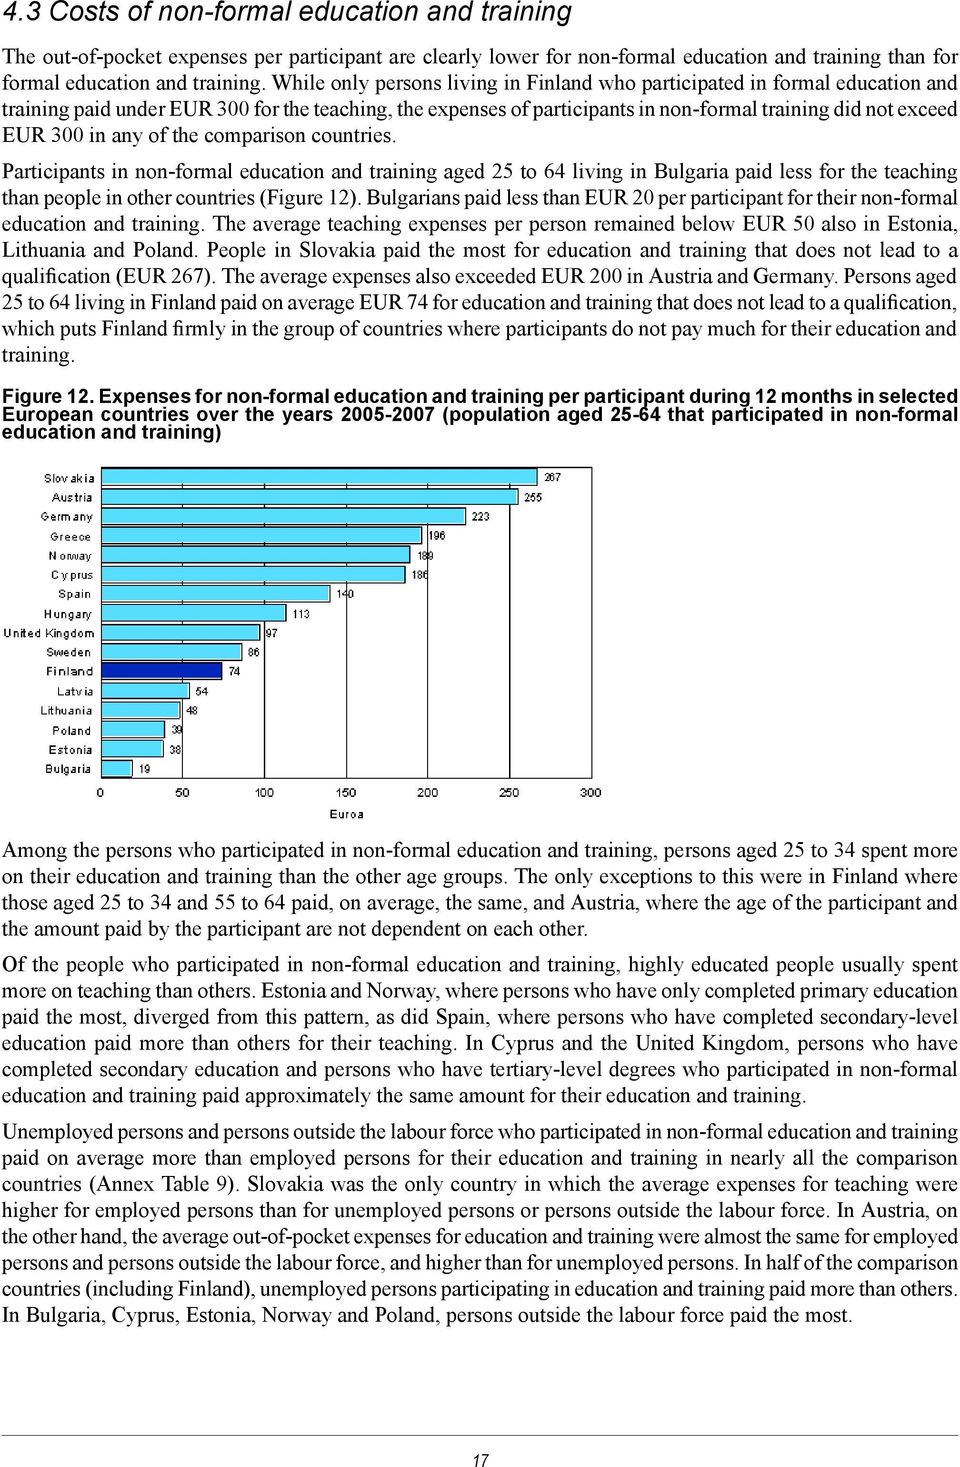 in any of the comparison countries. Participants in non-formal education and training aged 25 to 64 living in Bulgaria paid less for the teaching than people in other countries (Figure 12).